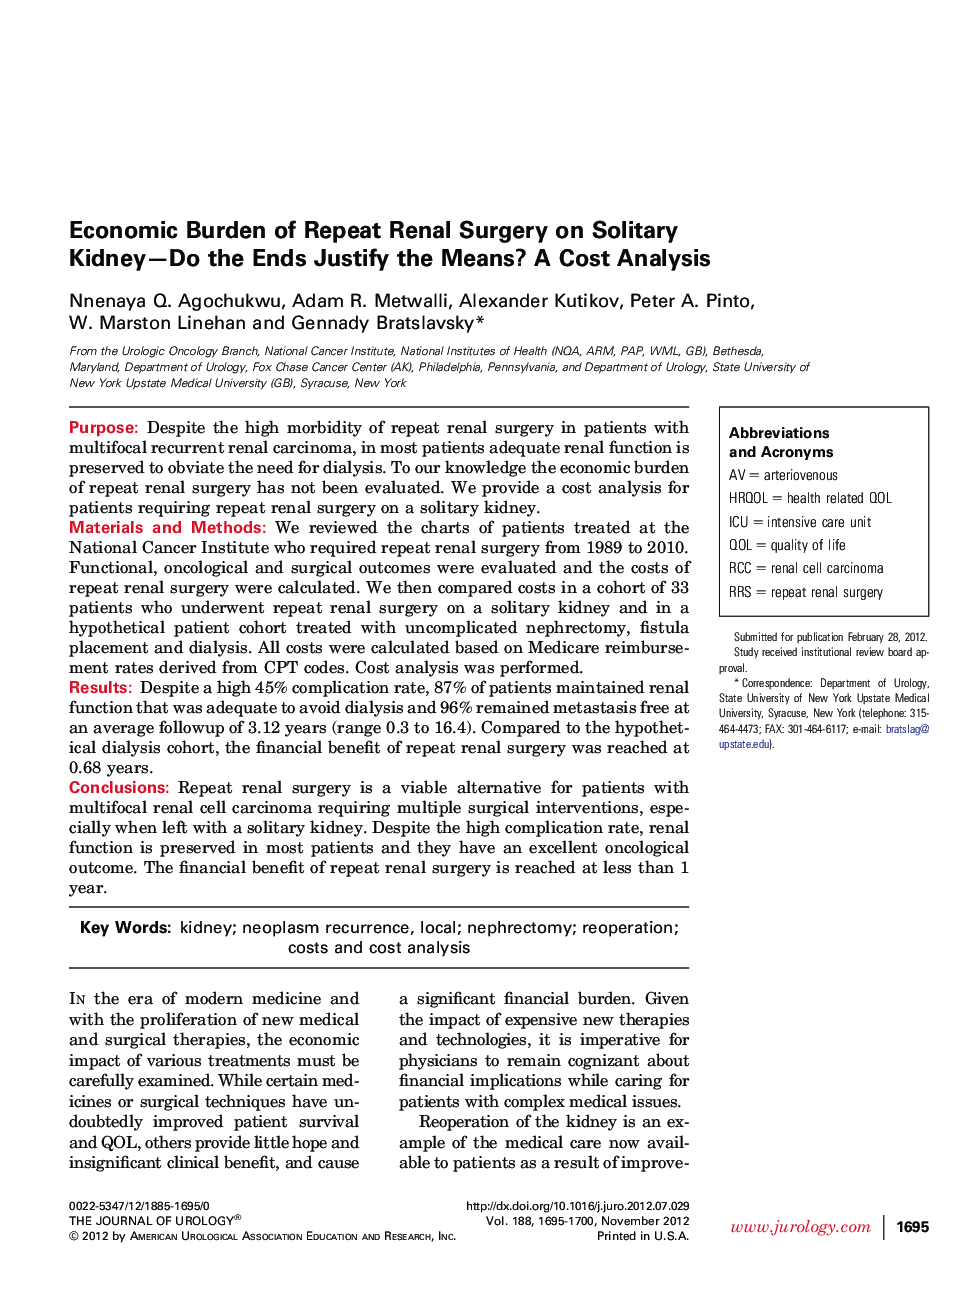 Economic Burden of Repeat Renal Surgery on Solitary Kidney—Do the Ends Justify the Means? A Cost Analysis 